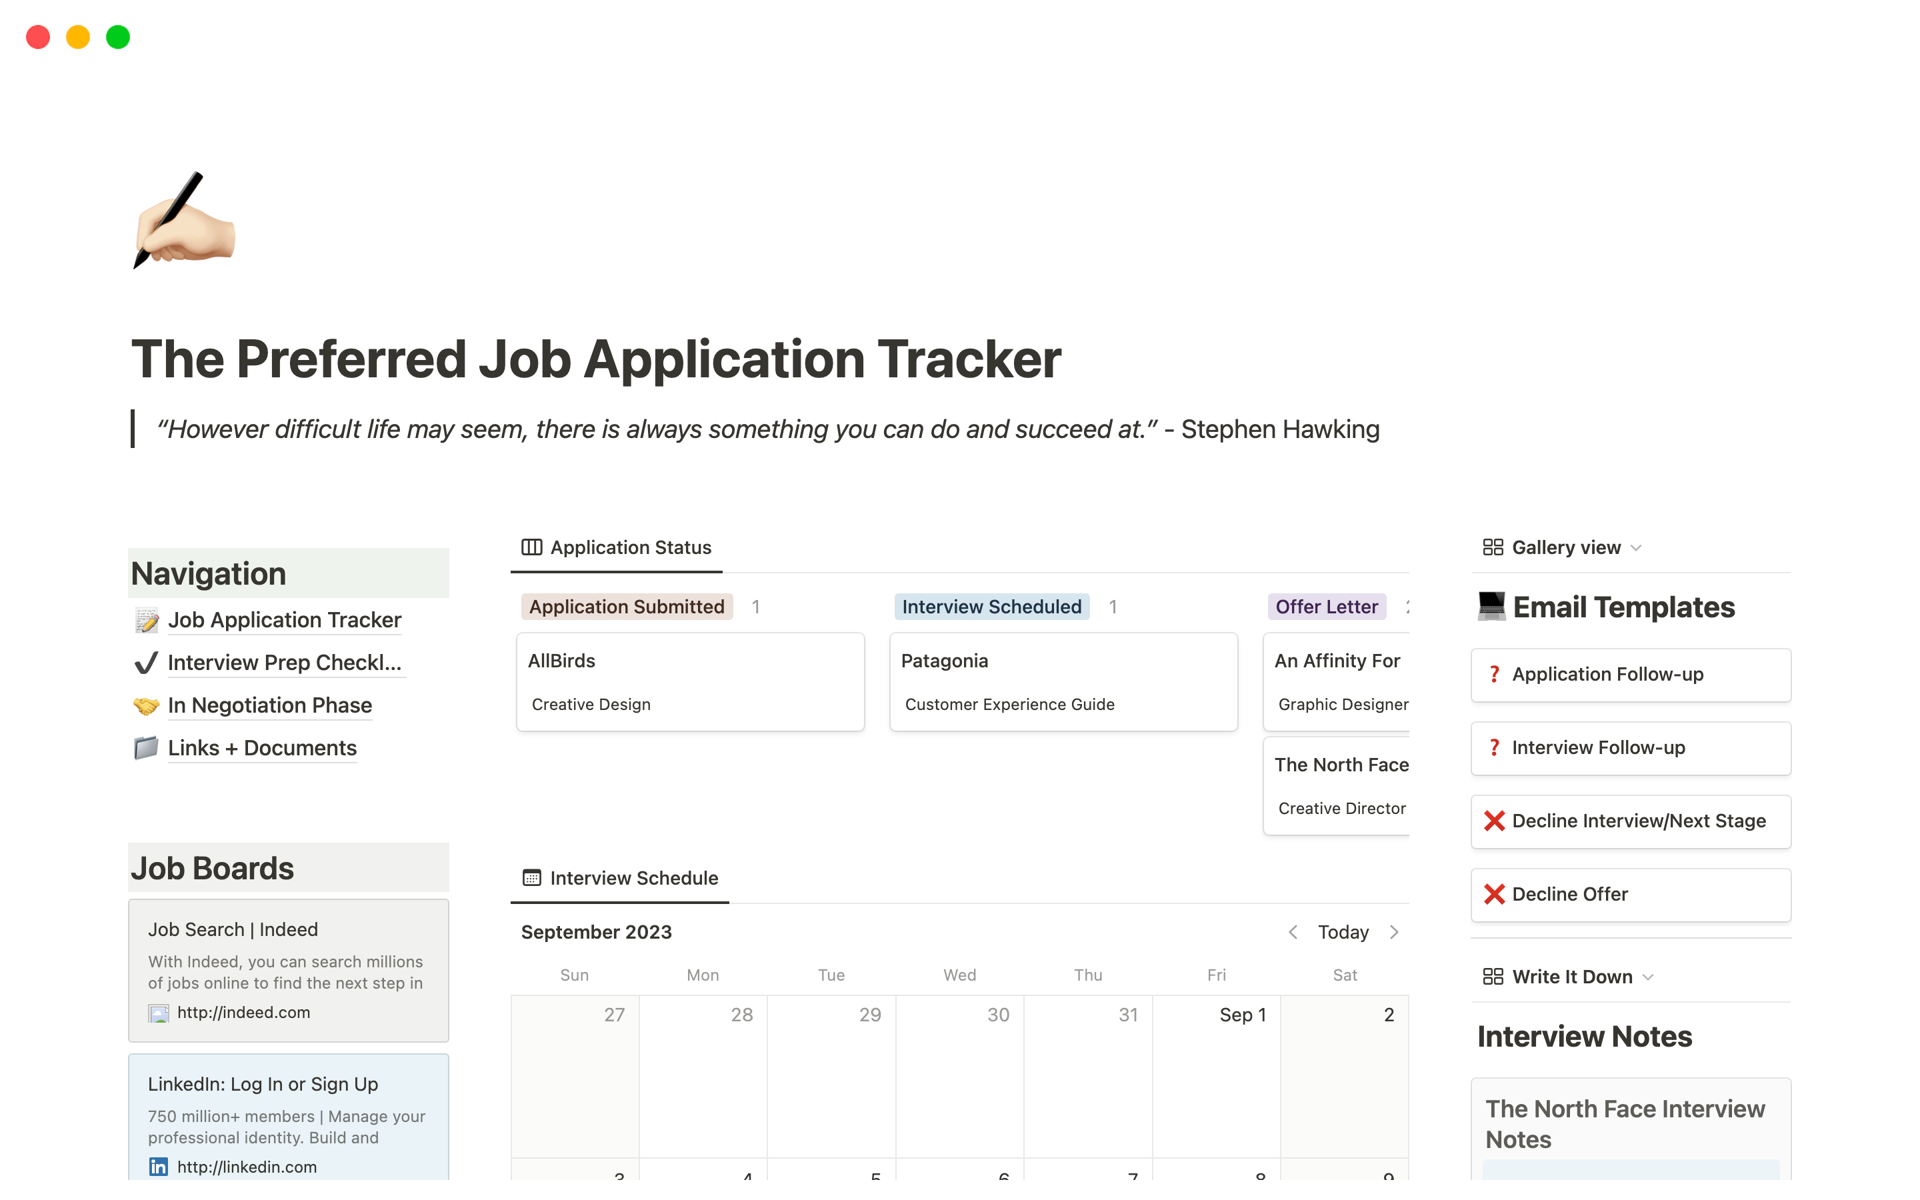 Help candidates stay organized with workflows and templates during their job search.